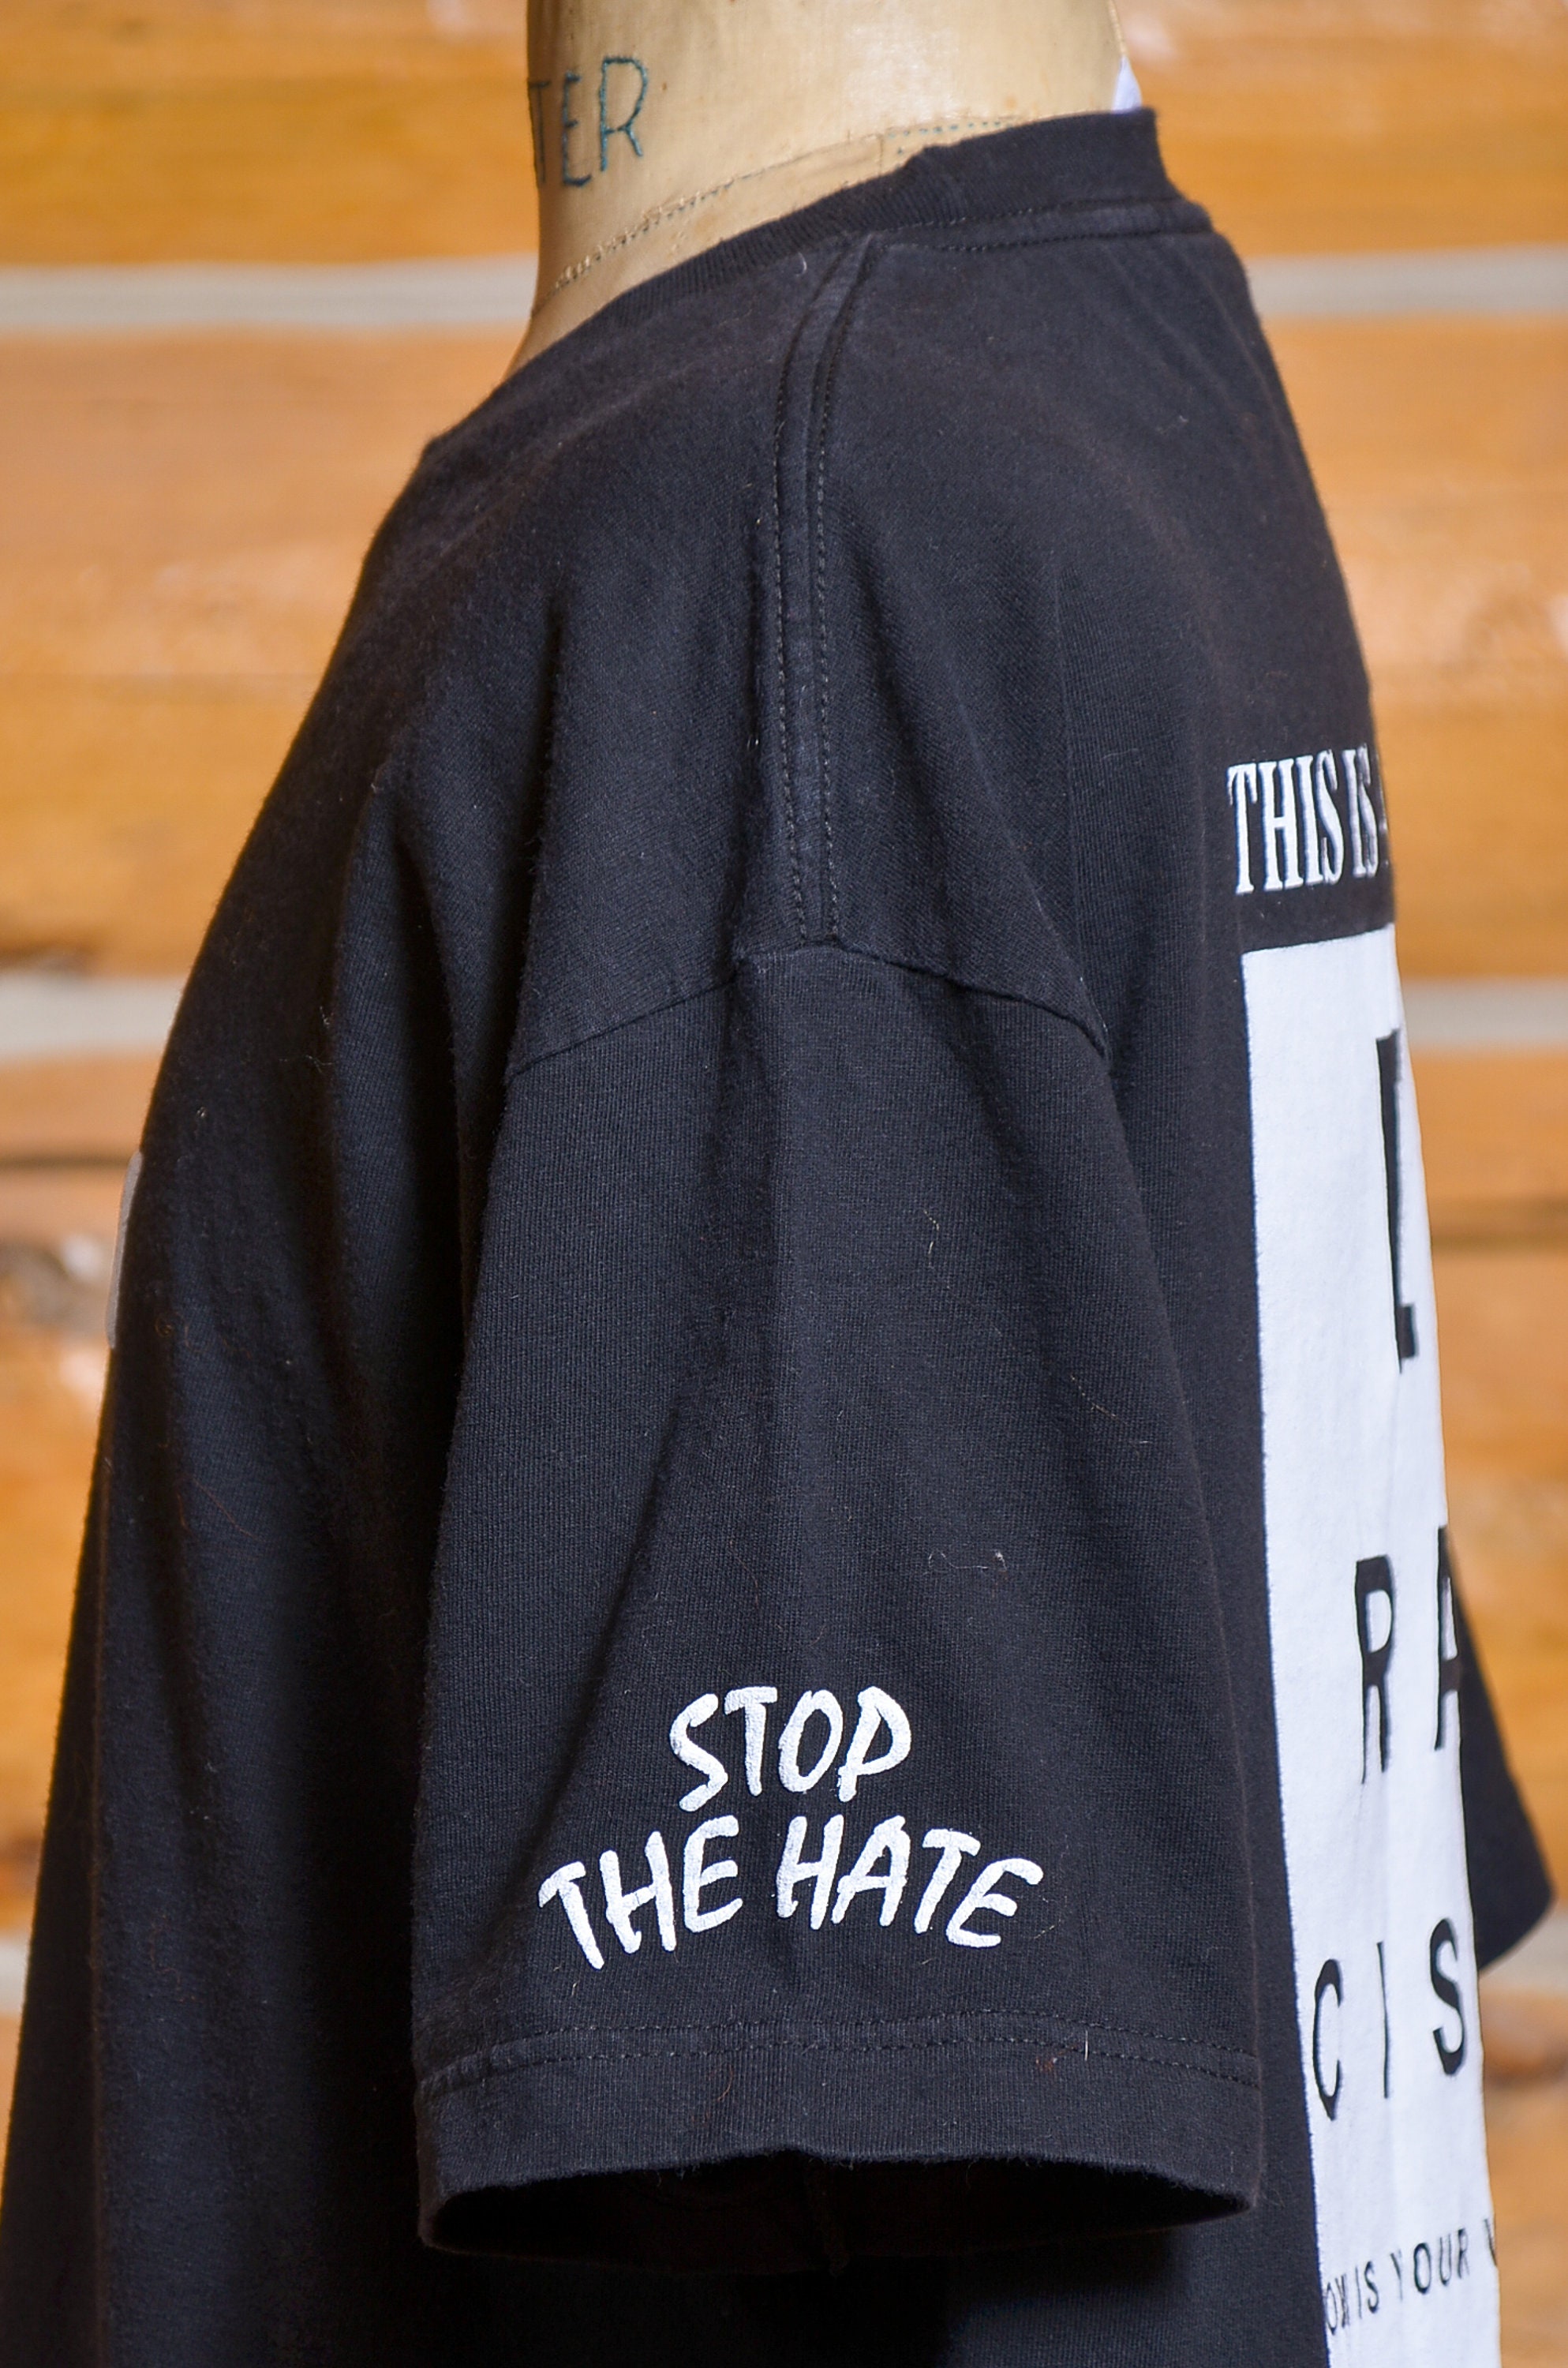 1993 Eracism Stop the Hate Black Shirt Etsy